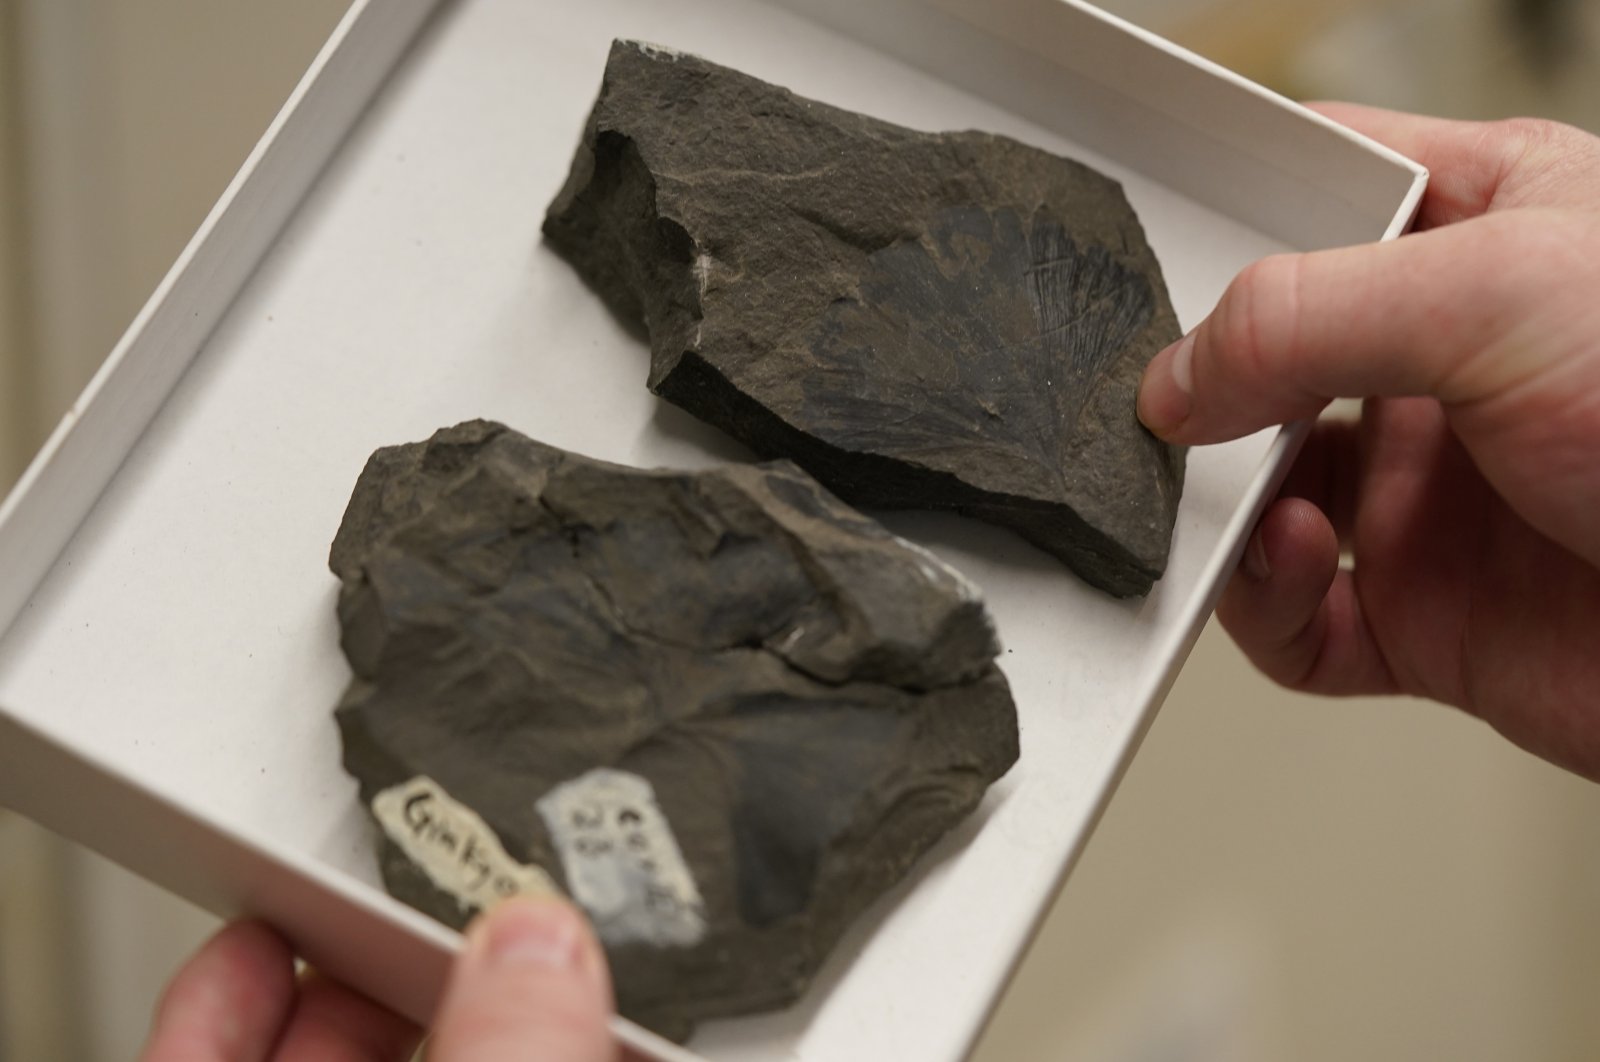 Rich Barclay, Smithsonian research geologist and director of the Fossil Atmospheres Project, holds a tray of Late Cretaceous ginkgo leaf fossils from Alaska's North Slope in the archives of the National Museum of Natural History in Washington, U.S., June 4, 2021. (AP Photo)